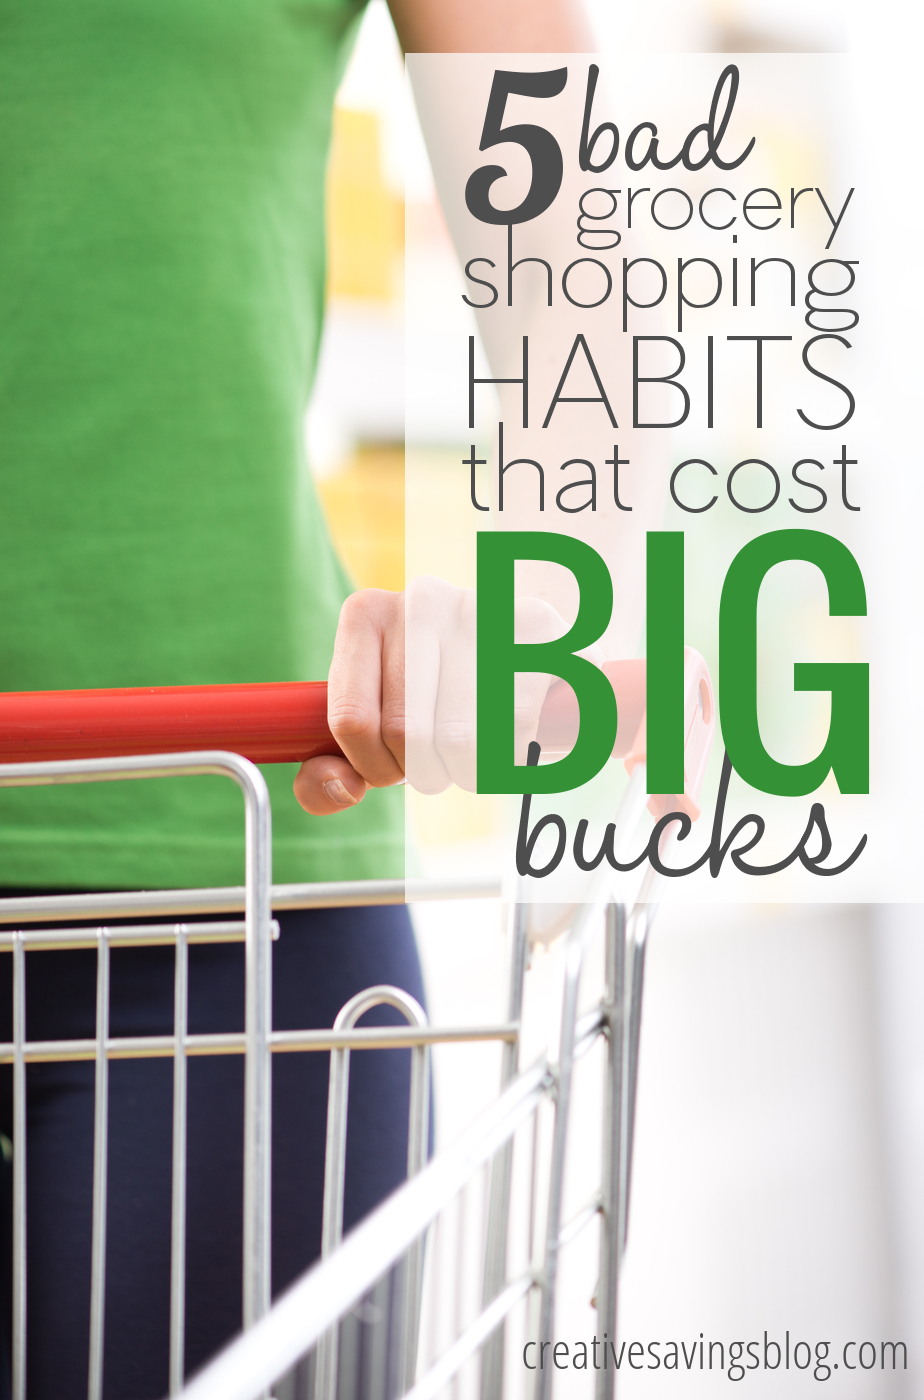 Stop wasting your hard-earned dollars with bad grocery shopping habits that literally take minutes to change. With consistent practice, you'll not only learn to shop smarter, you'll also shave hundreds off your bill!